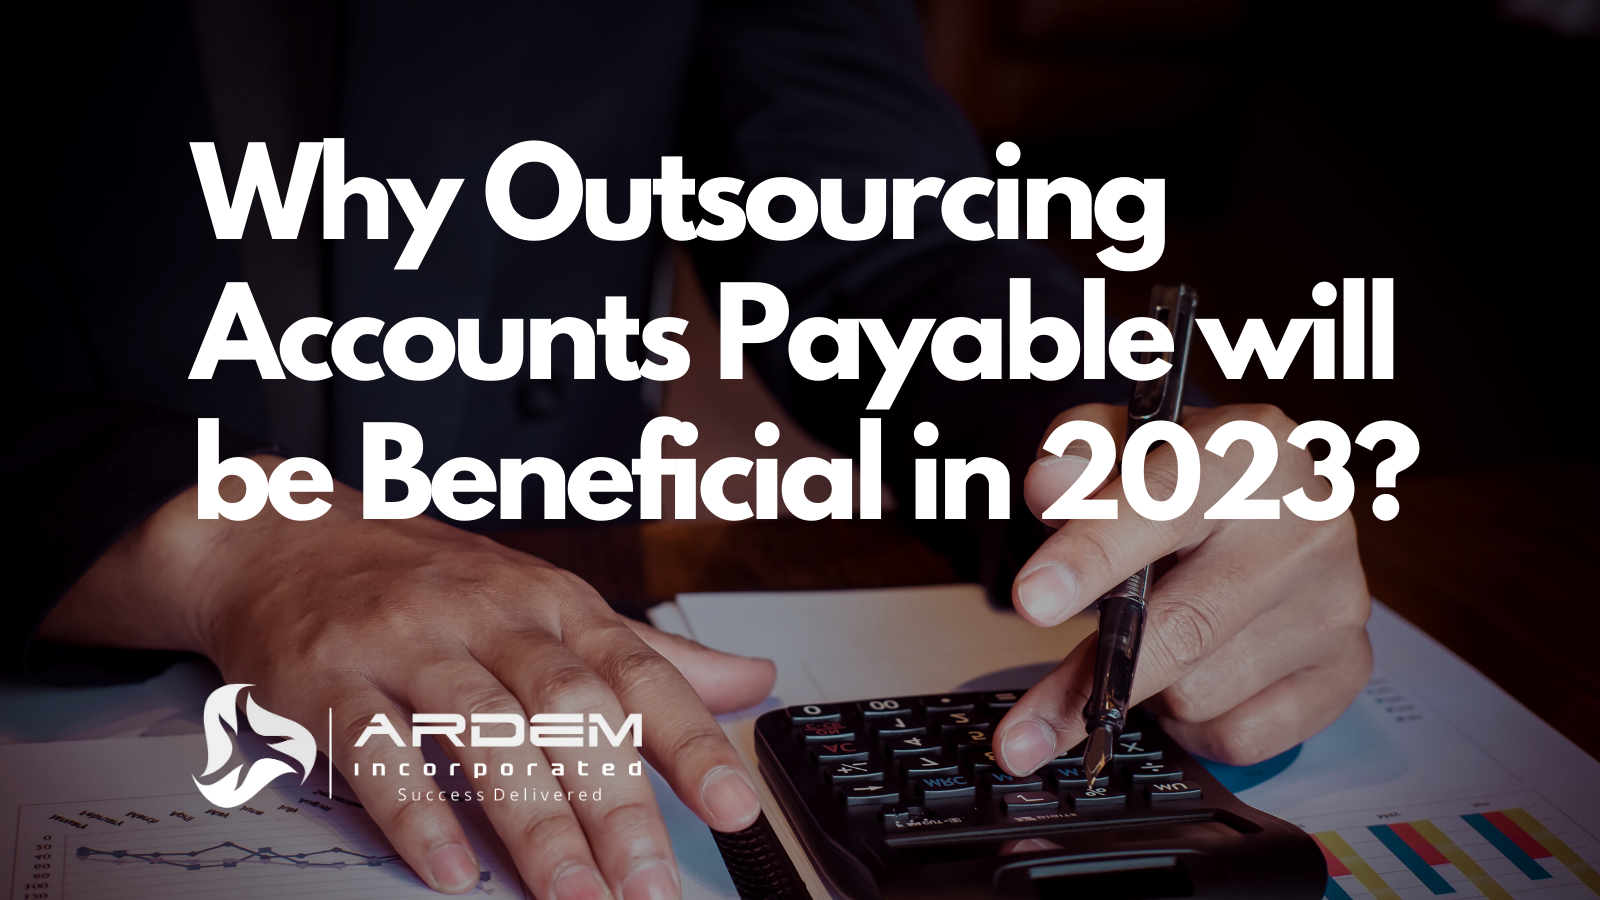 Accounts Payable Outsourcing Accounting Finance Blog